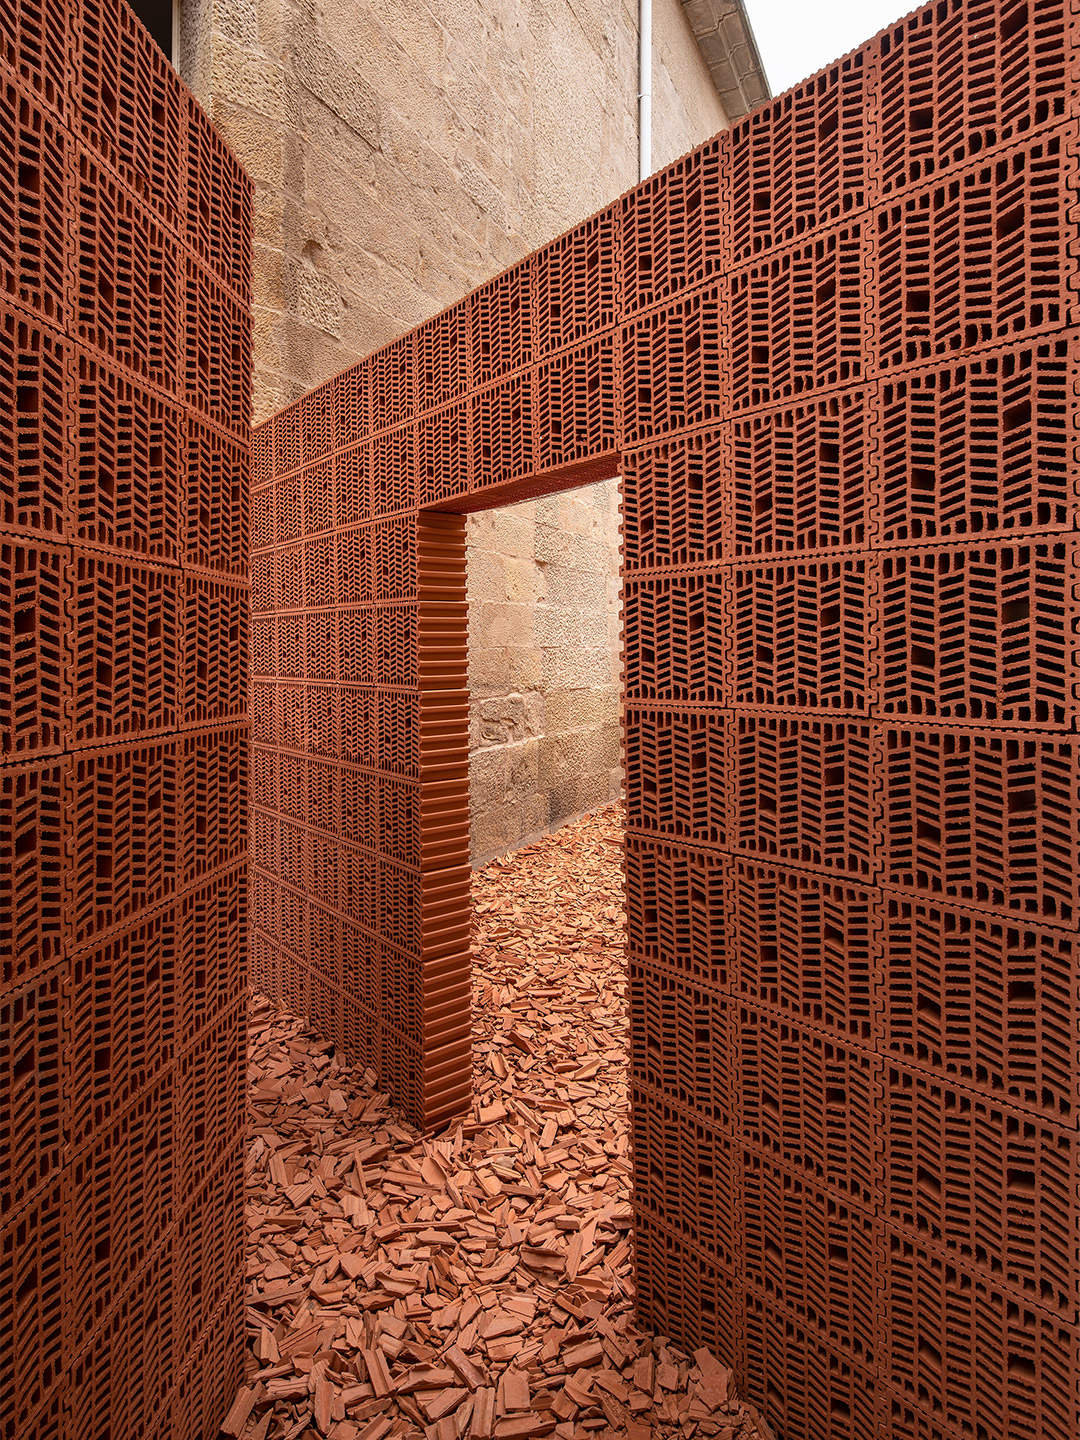 ‘Types of Spaces’: a temporary exhibit in Logroño, Spain, by Palma + HANGHAR